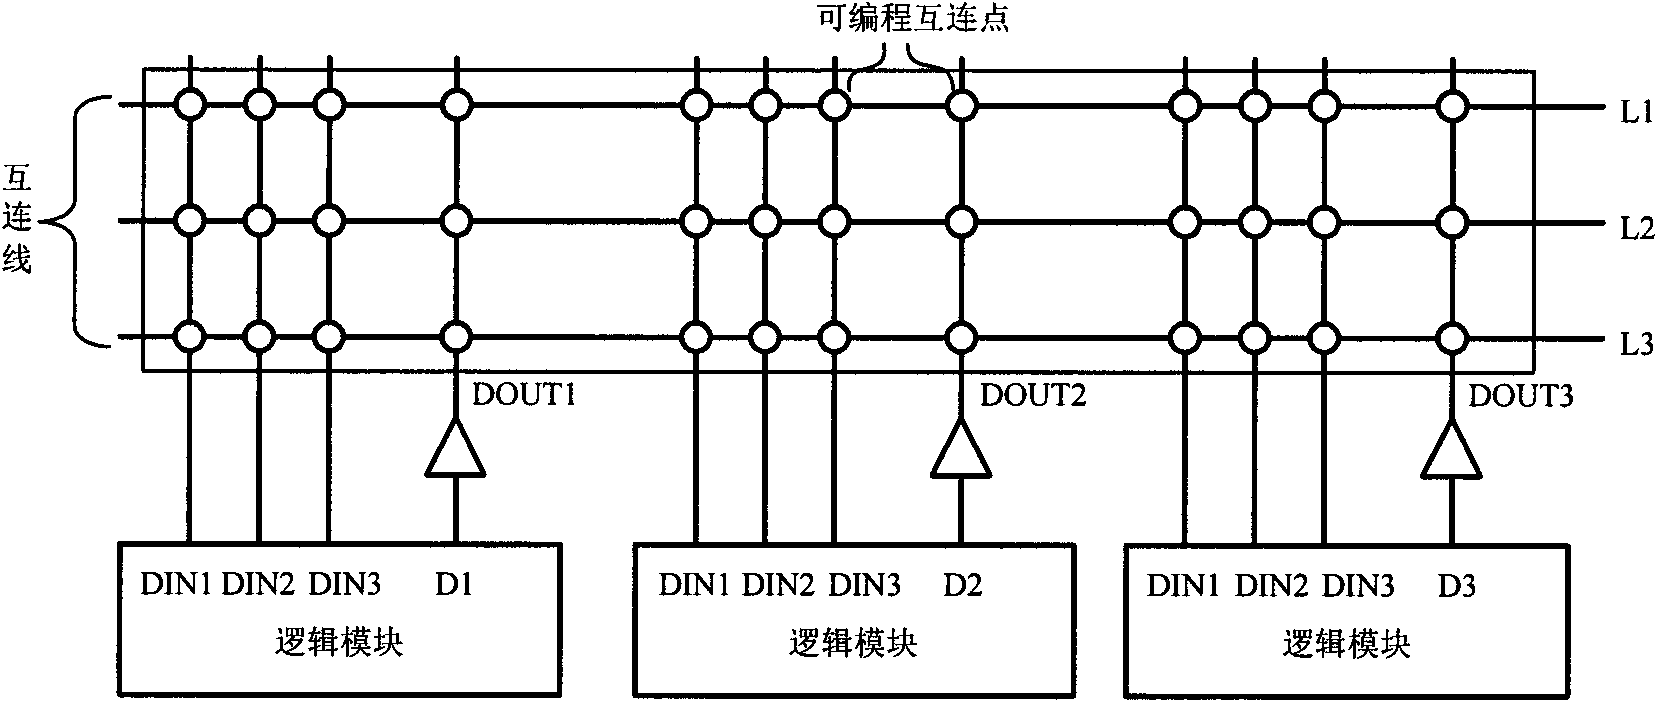 Interconnection matrix for uncompetitive electrification, configuration and reconfiguration of FPGA (Field Programmable Gate Array)